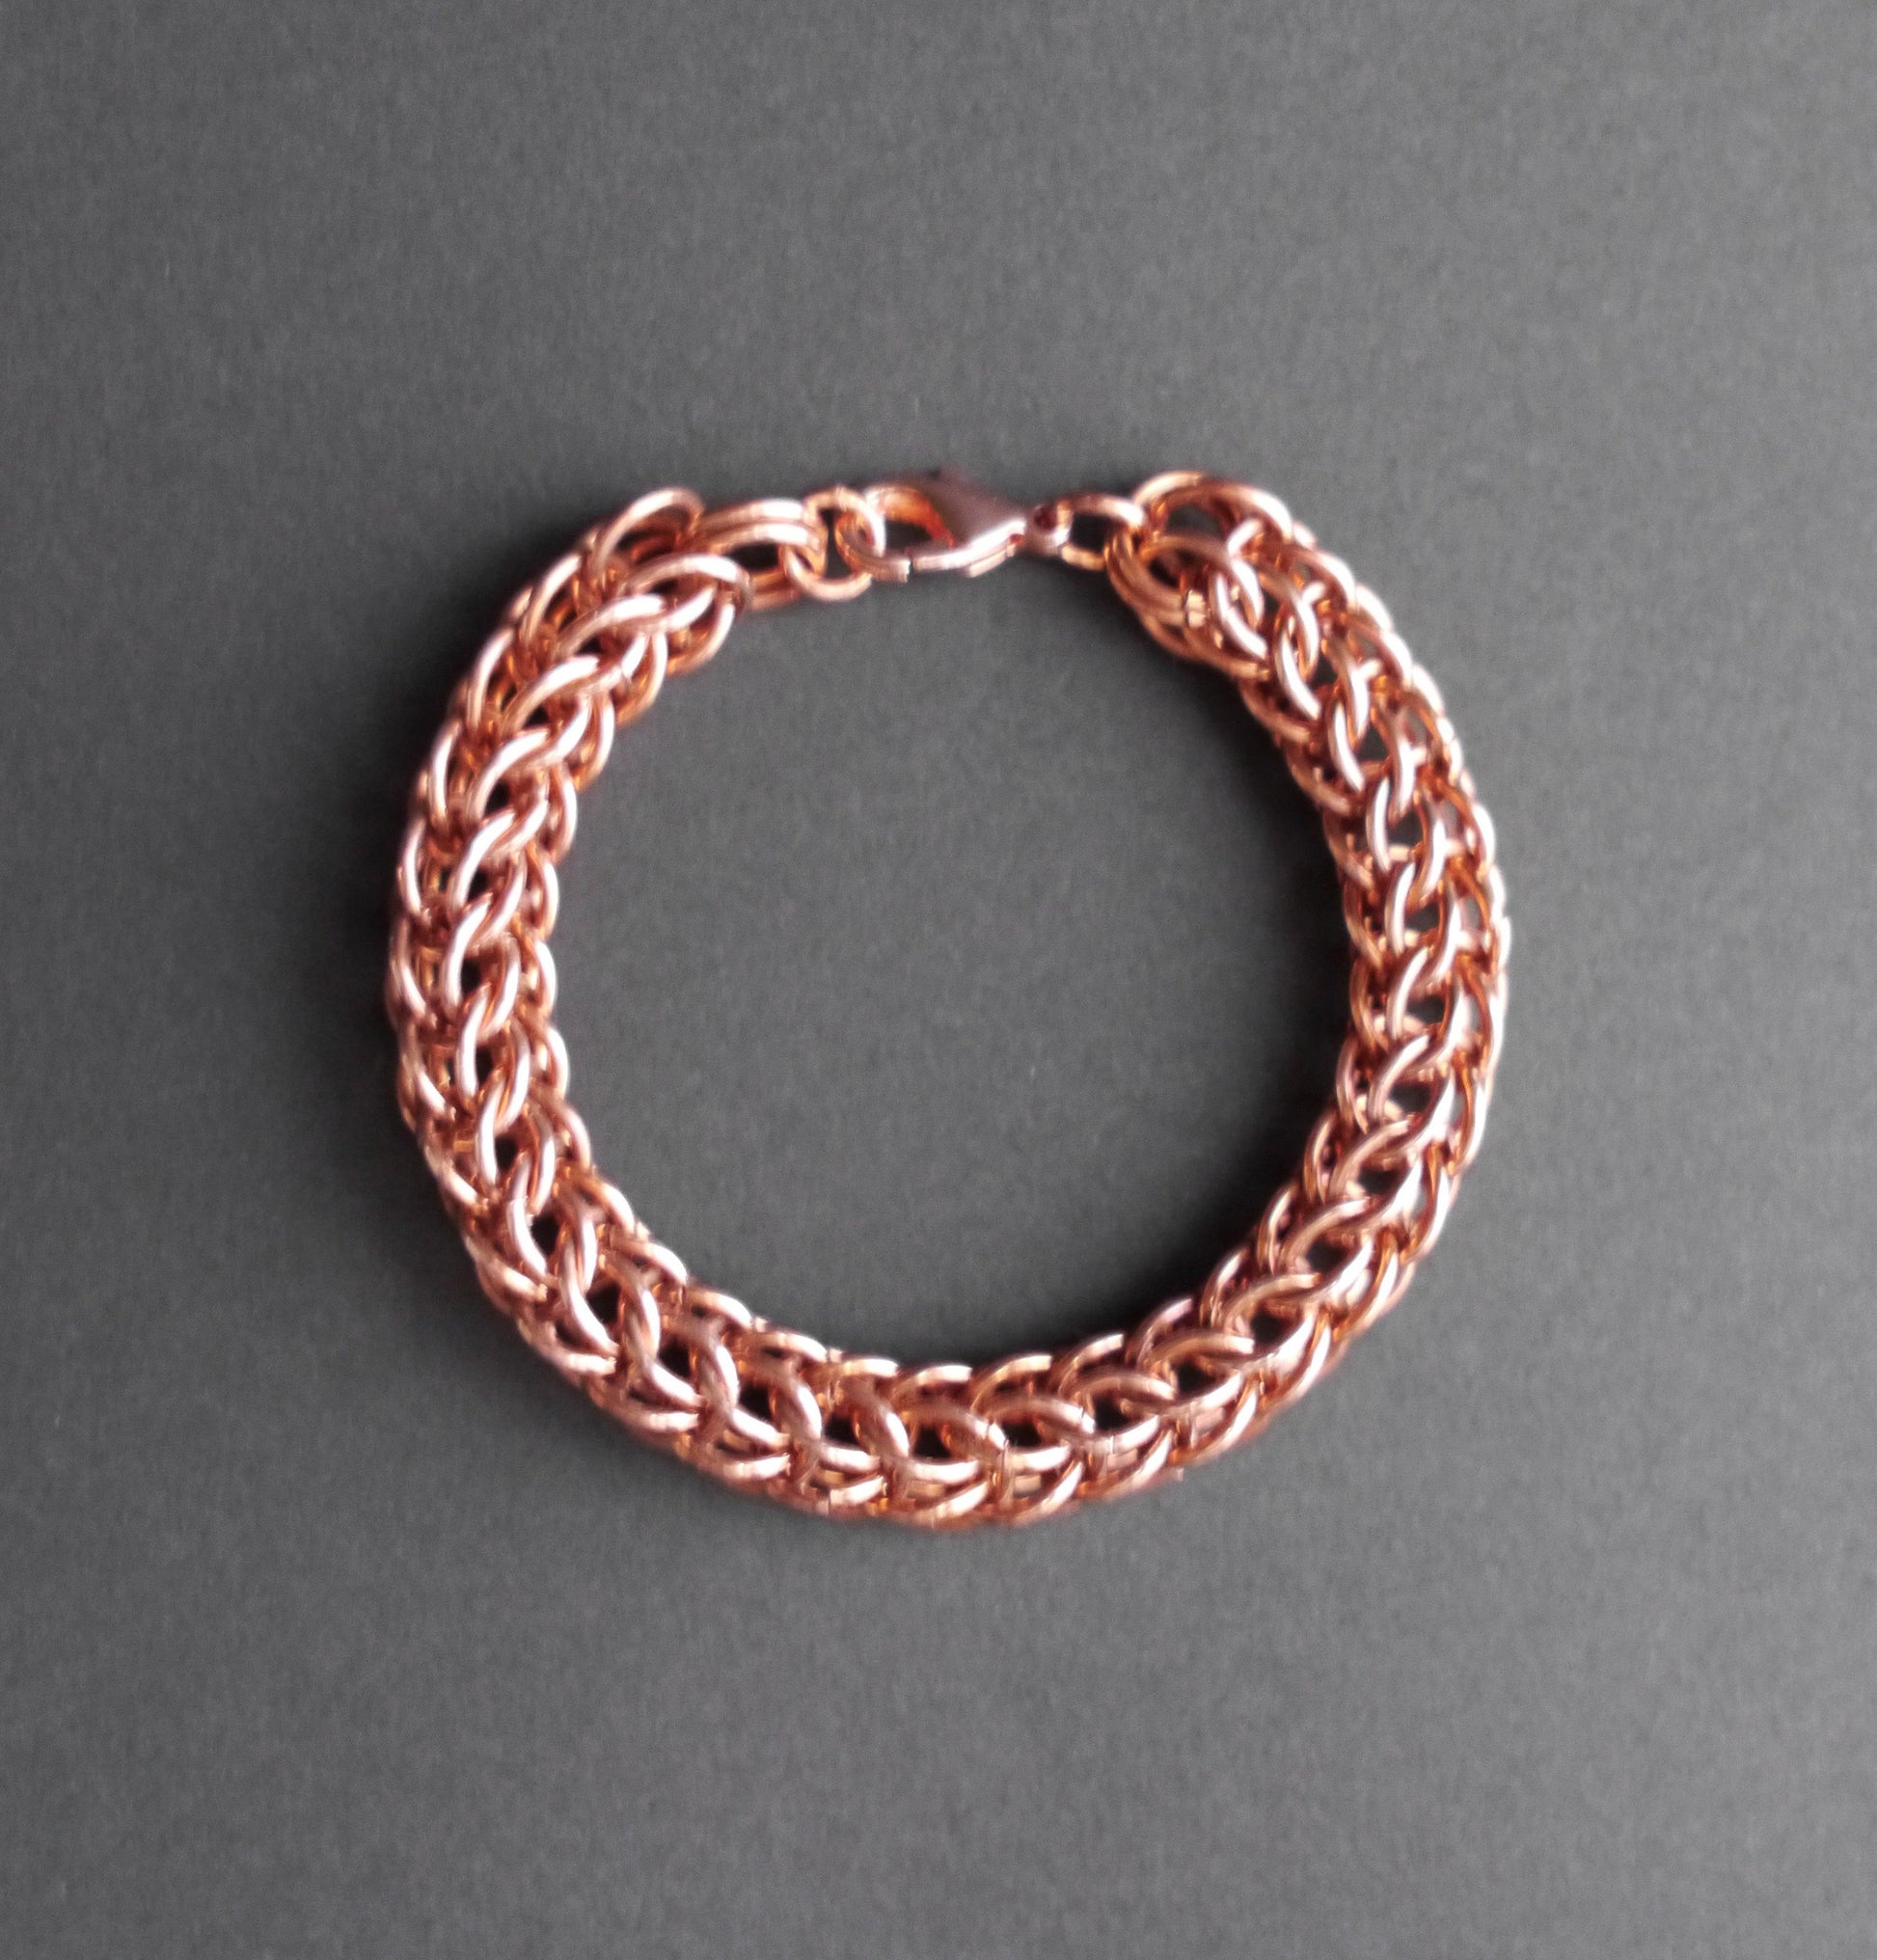 10mm Full Persian Chainmaille Bracelet in Copper – Three Crows Metalworks